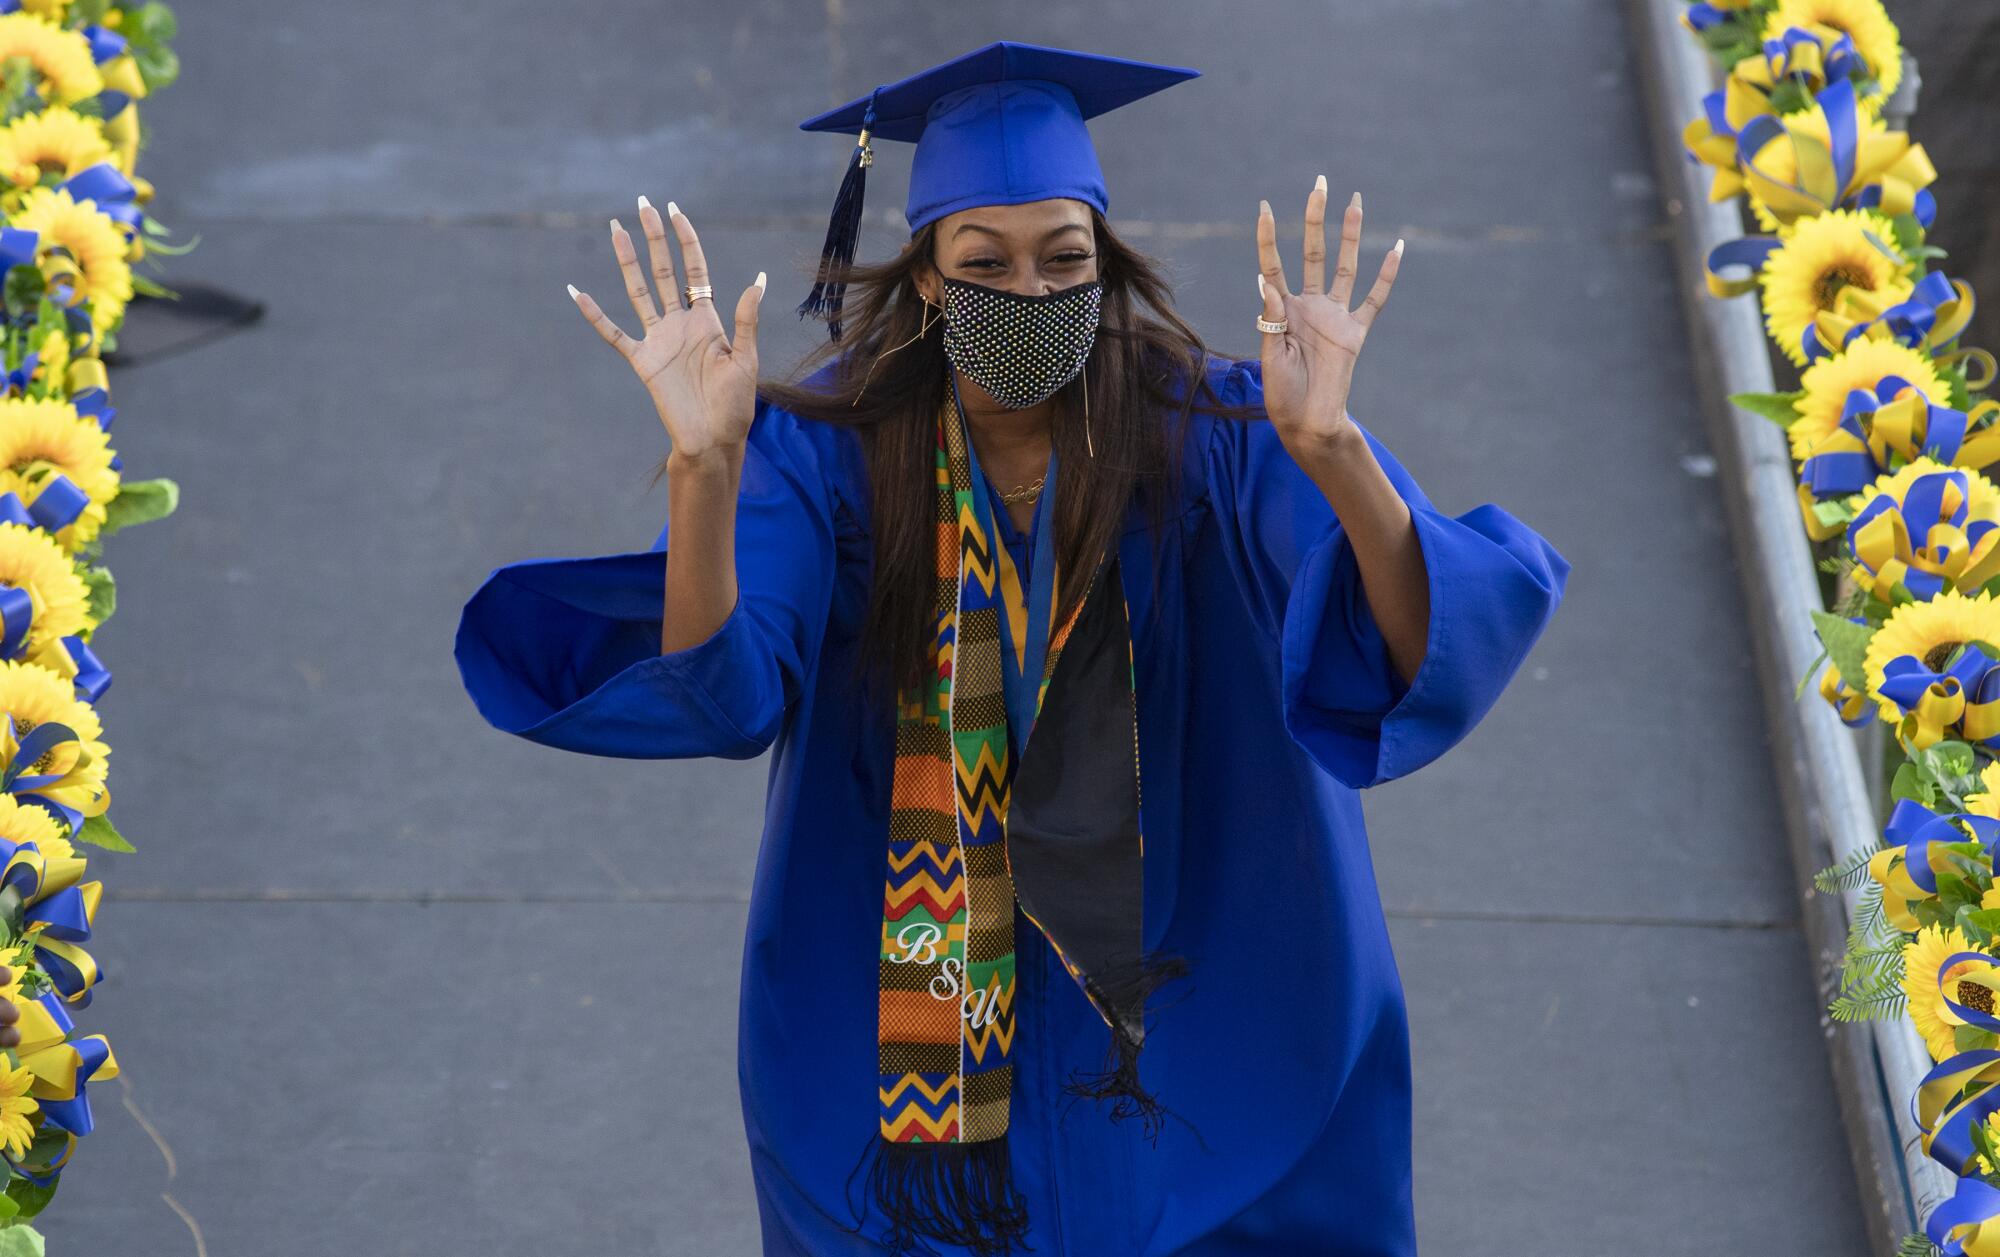 A student in cap and gown waves with both hands.